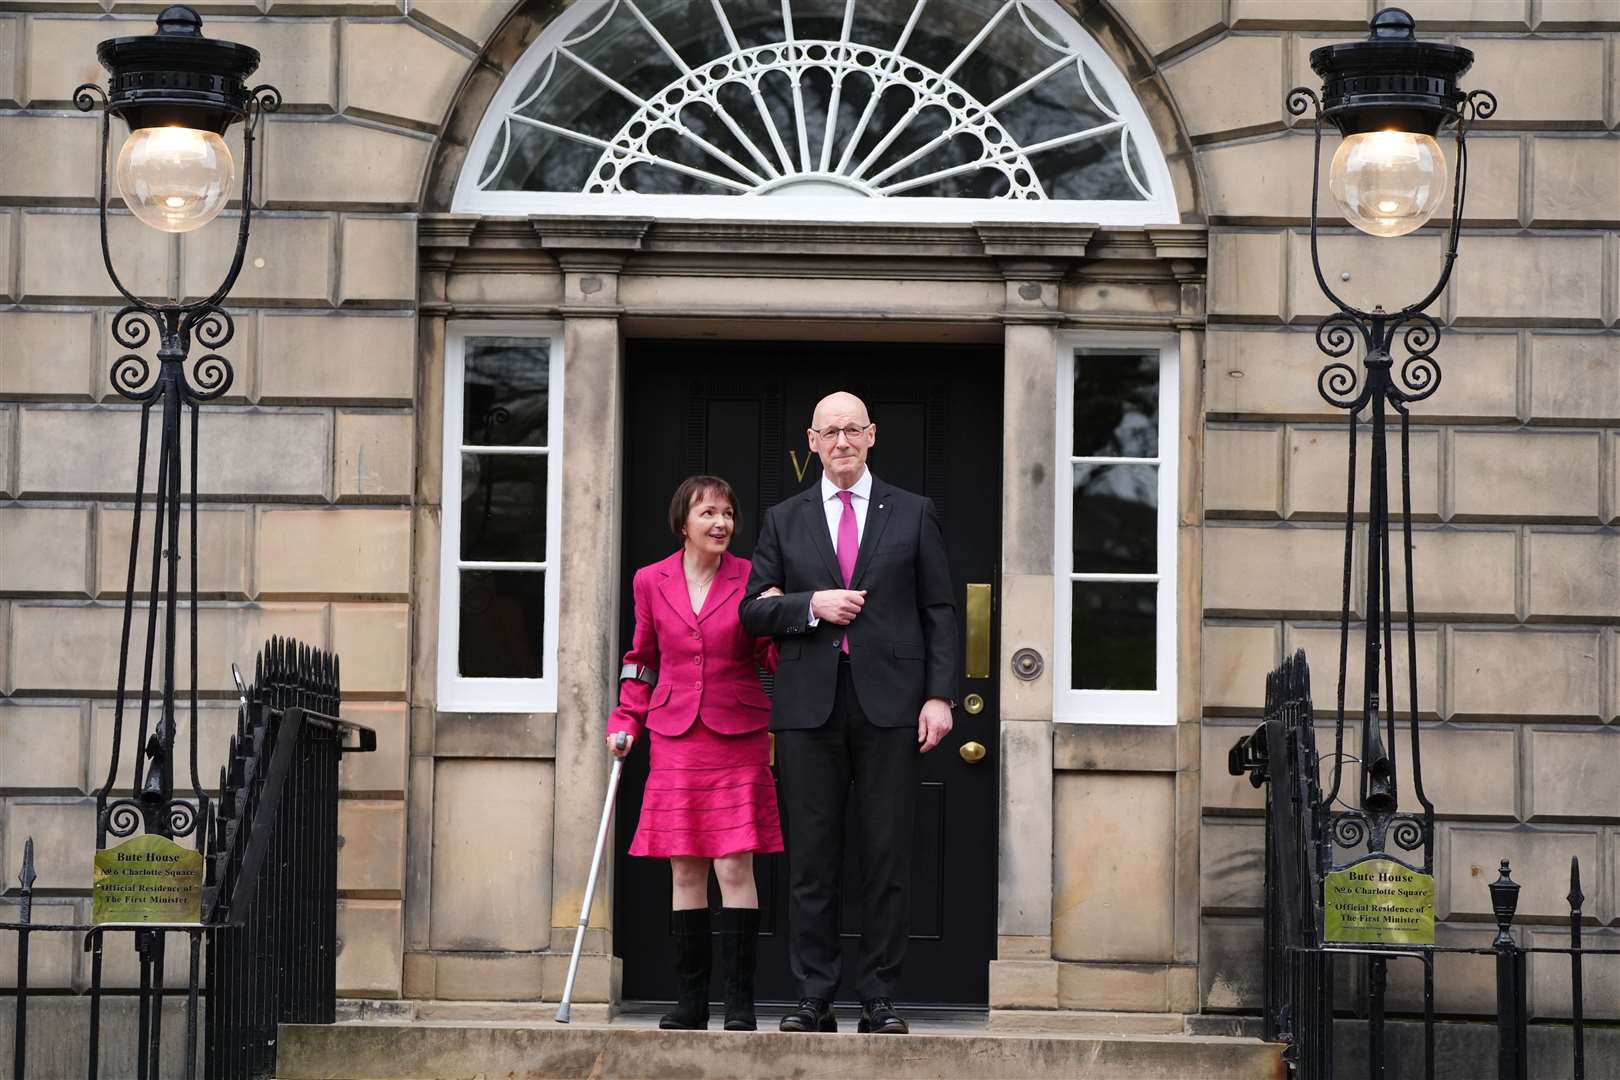 John Swinney with his wife Elizabeth Quigley on the steps of Bute House in Edinburgh (Andrew Milligan/PA)